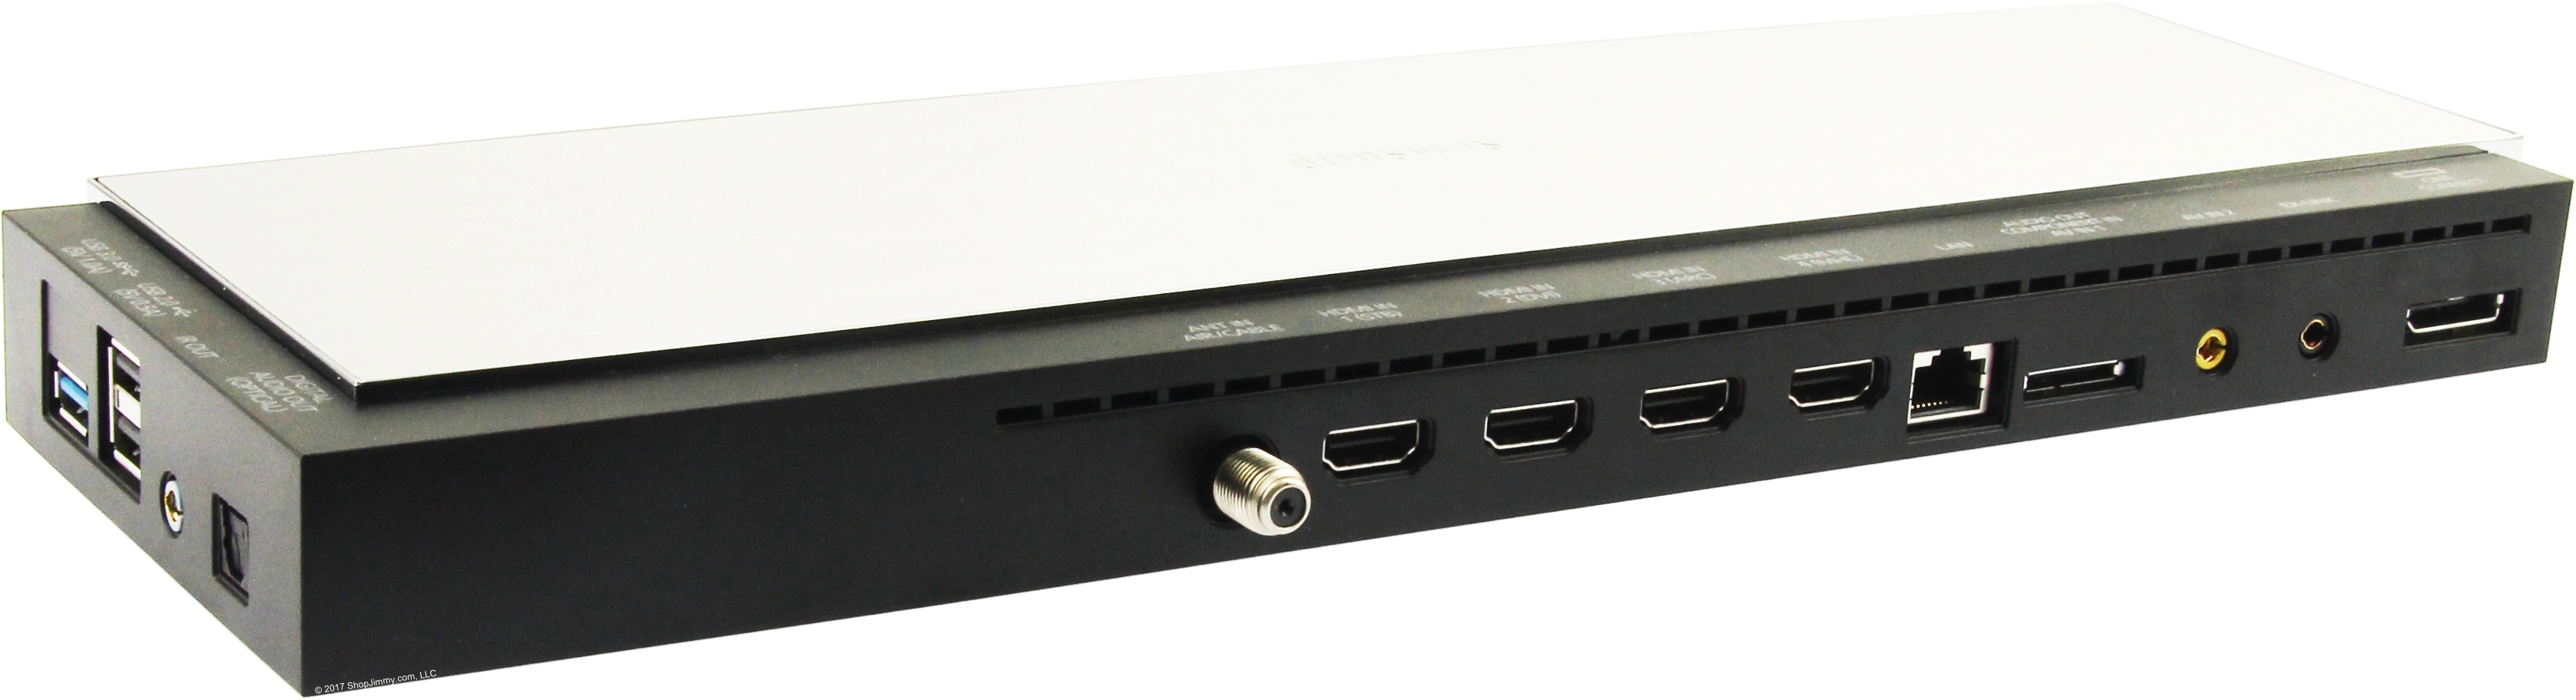 Which type of ports are available on Samsung One Connect box